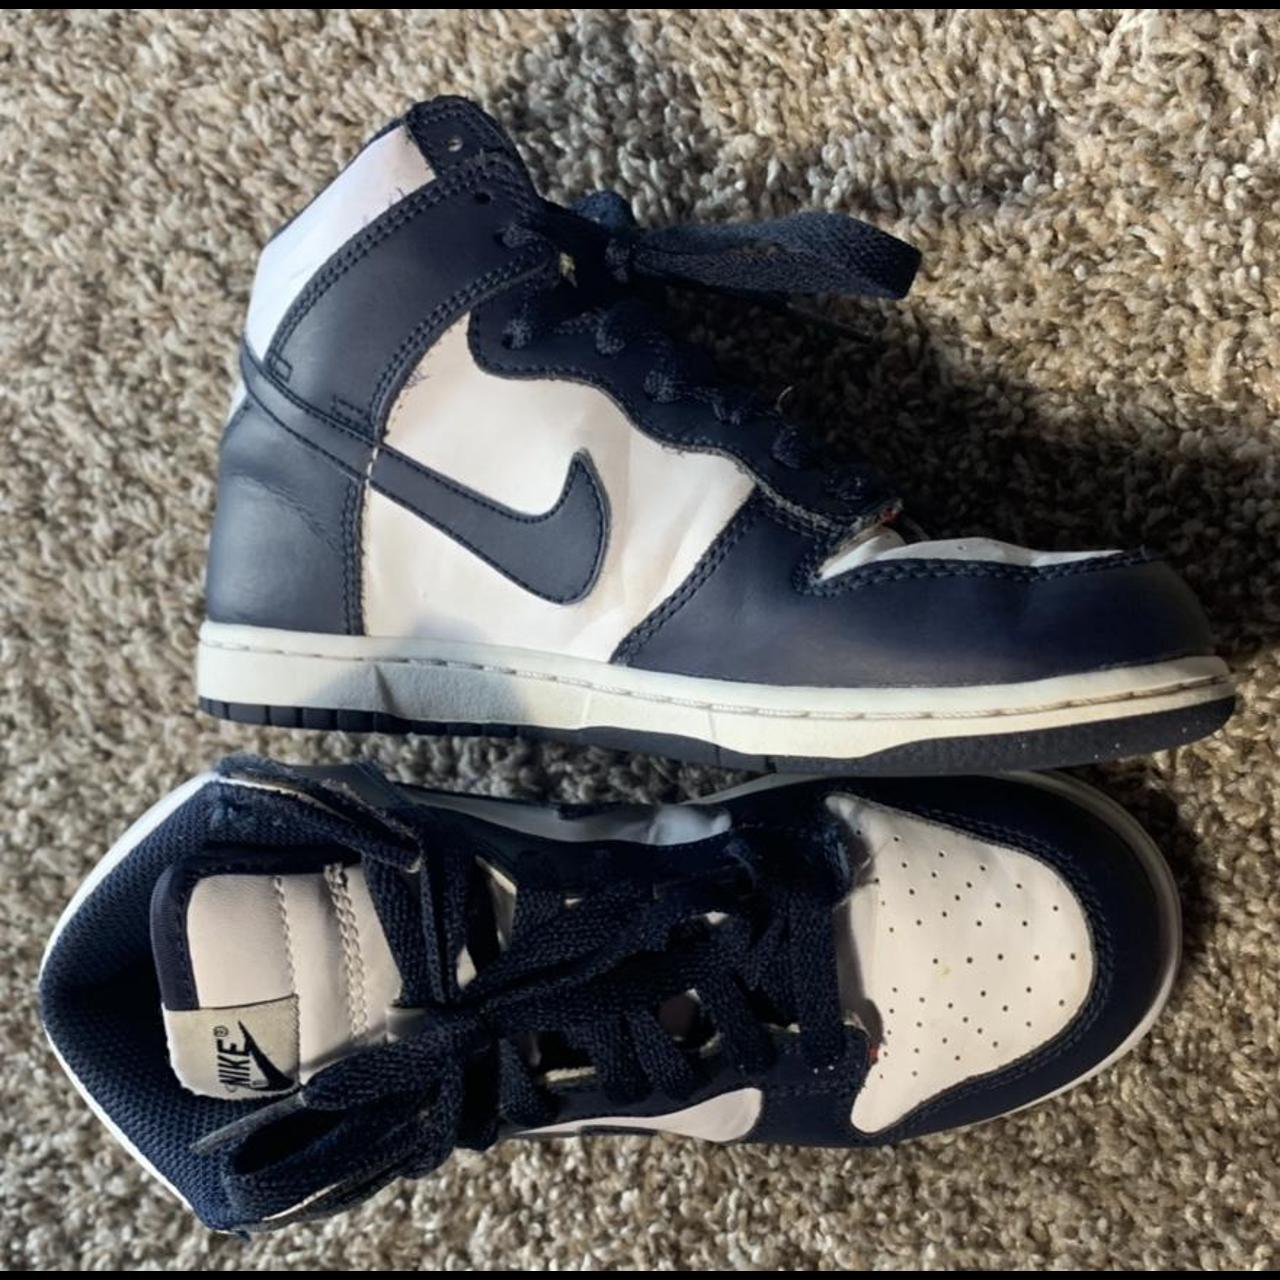 Nike Dunk High “Midnight Navy” in size 1.5y or a 3... - Depop